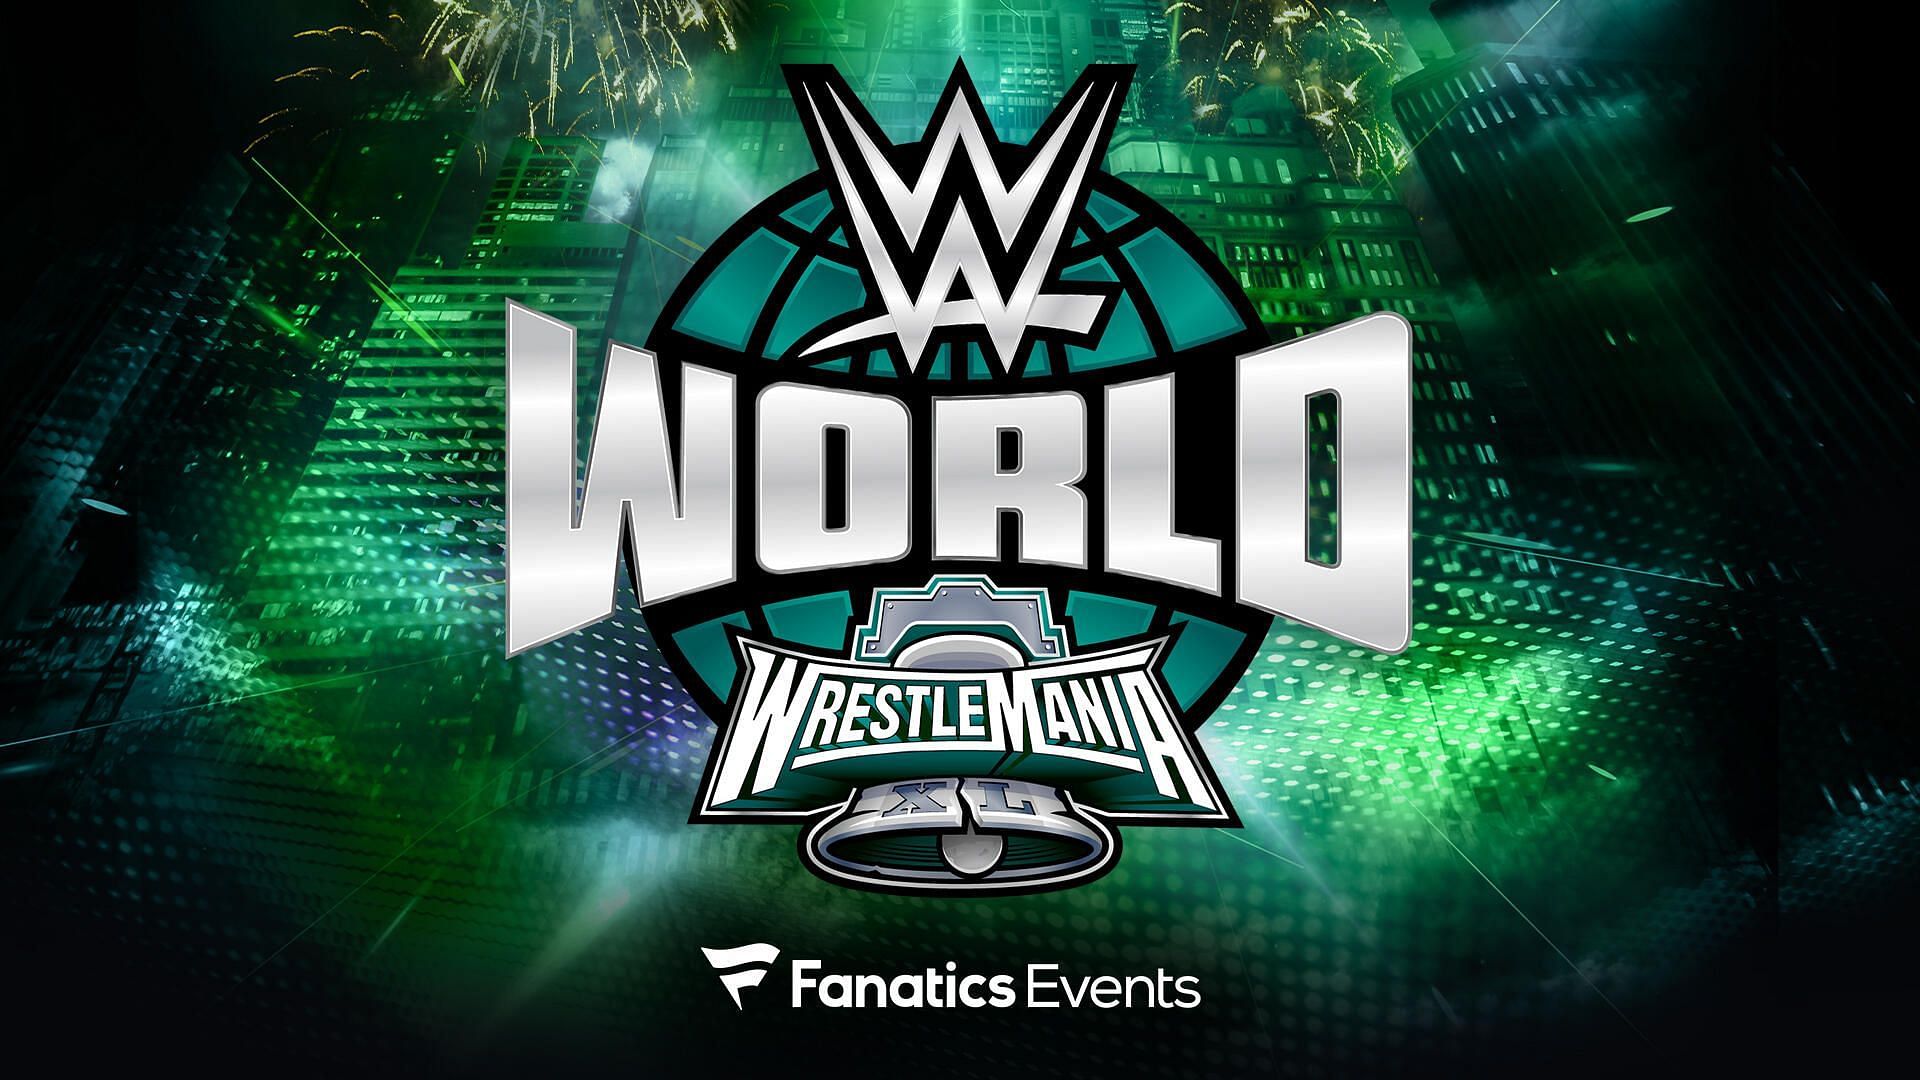 WWE World will be a great experience for fans 